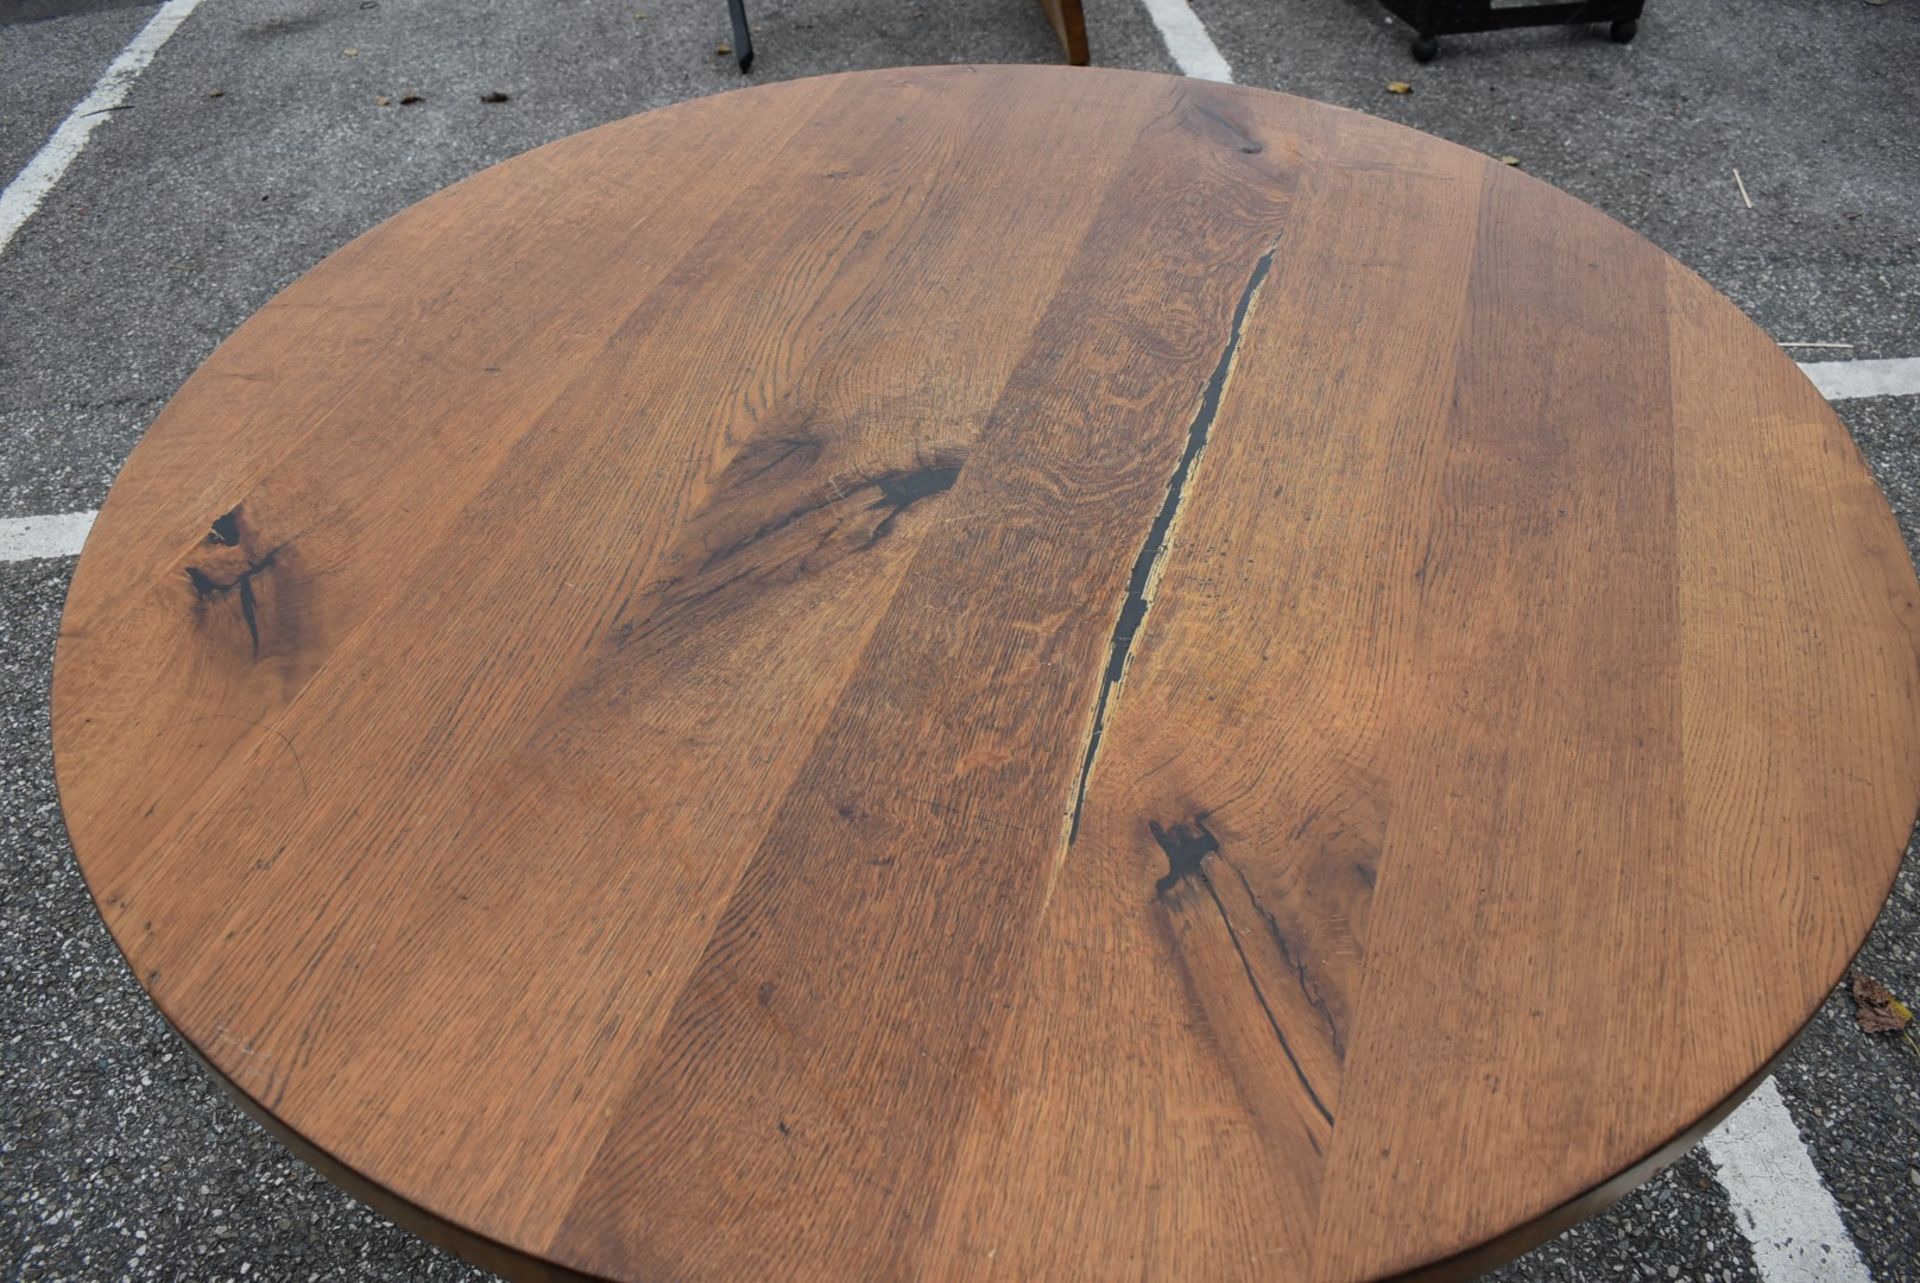 1 x Solid Oak 120cm Round Restaurant Table - Natural Rustic Knotty Oak Tops With Rustic Timber Base - Image 2 of 4